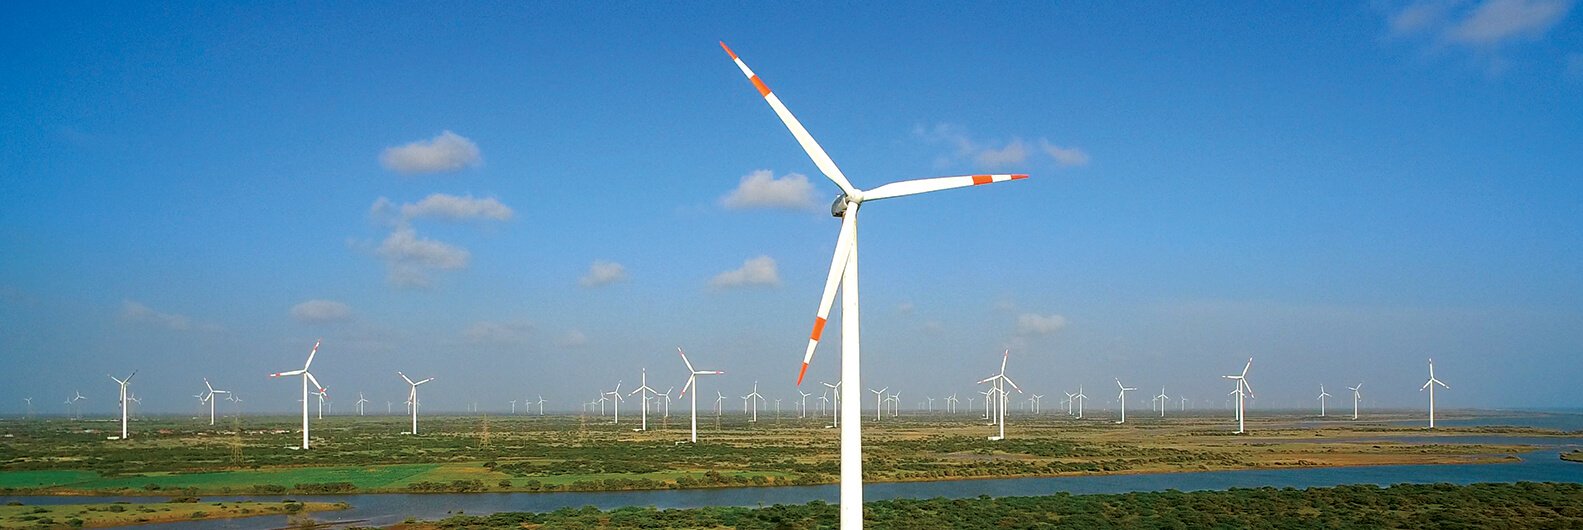 Suzlon Energy Limited a manufacturer of wind turbines, is preparing for a Rs 1,200 rights issue that begins on October 11. This comes after the company's founder and chairman Tulsi Tanti passed away unexpectedly.